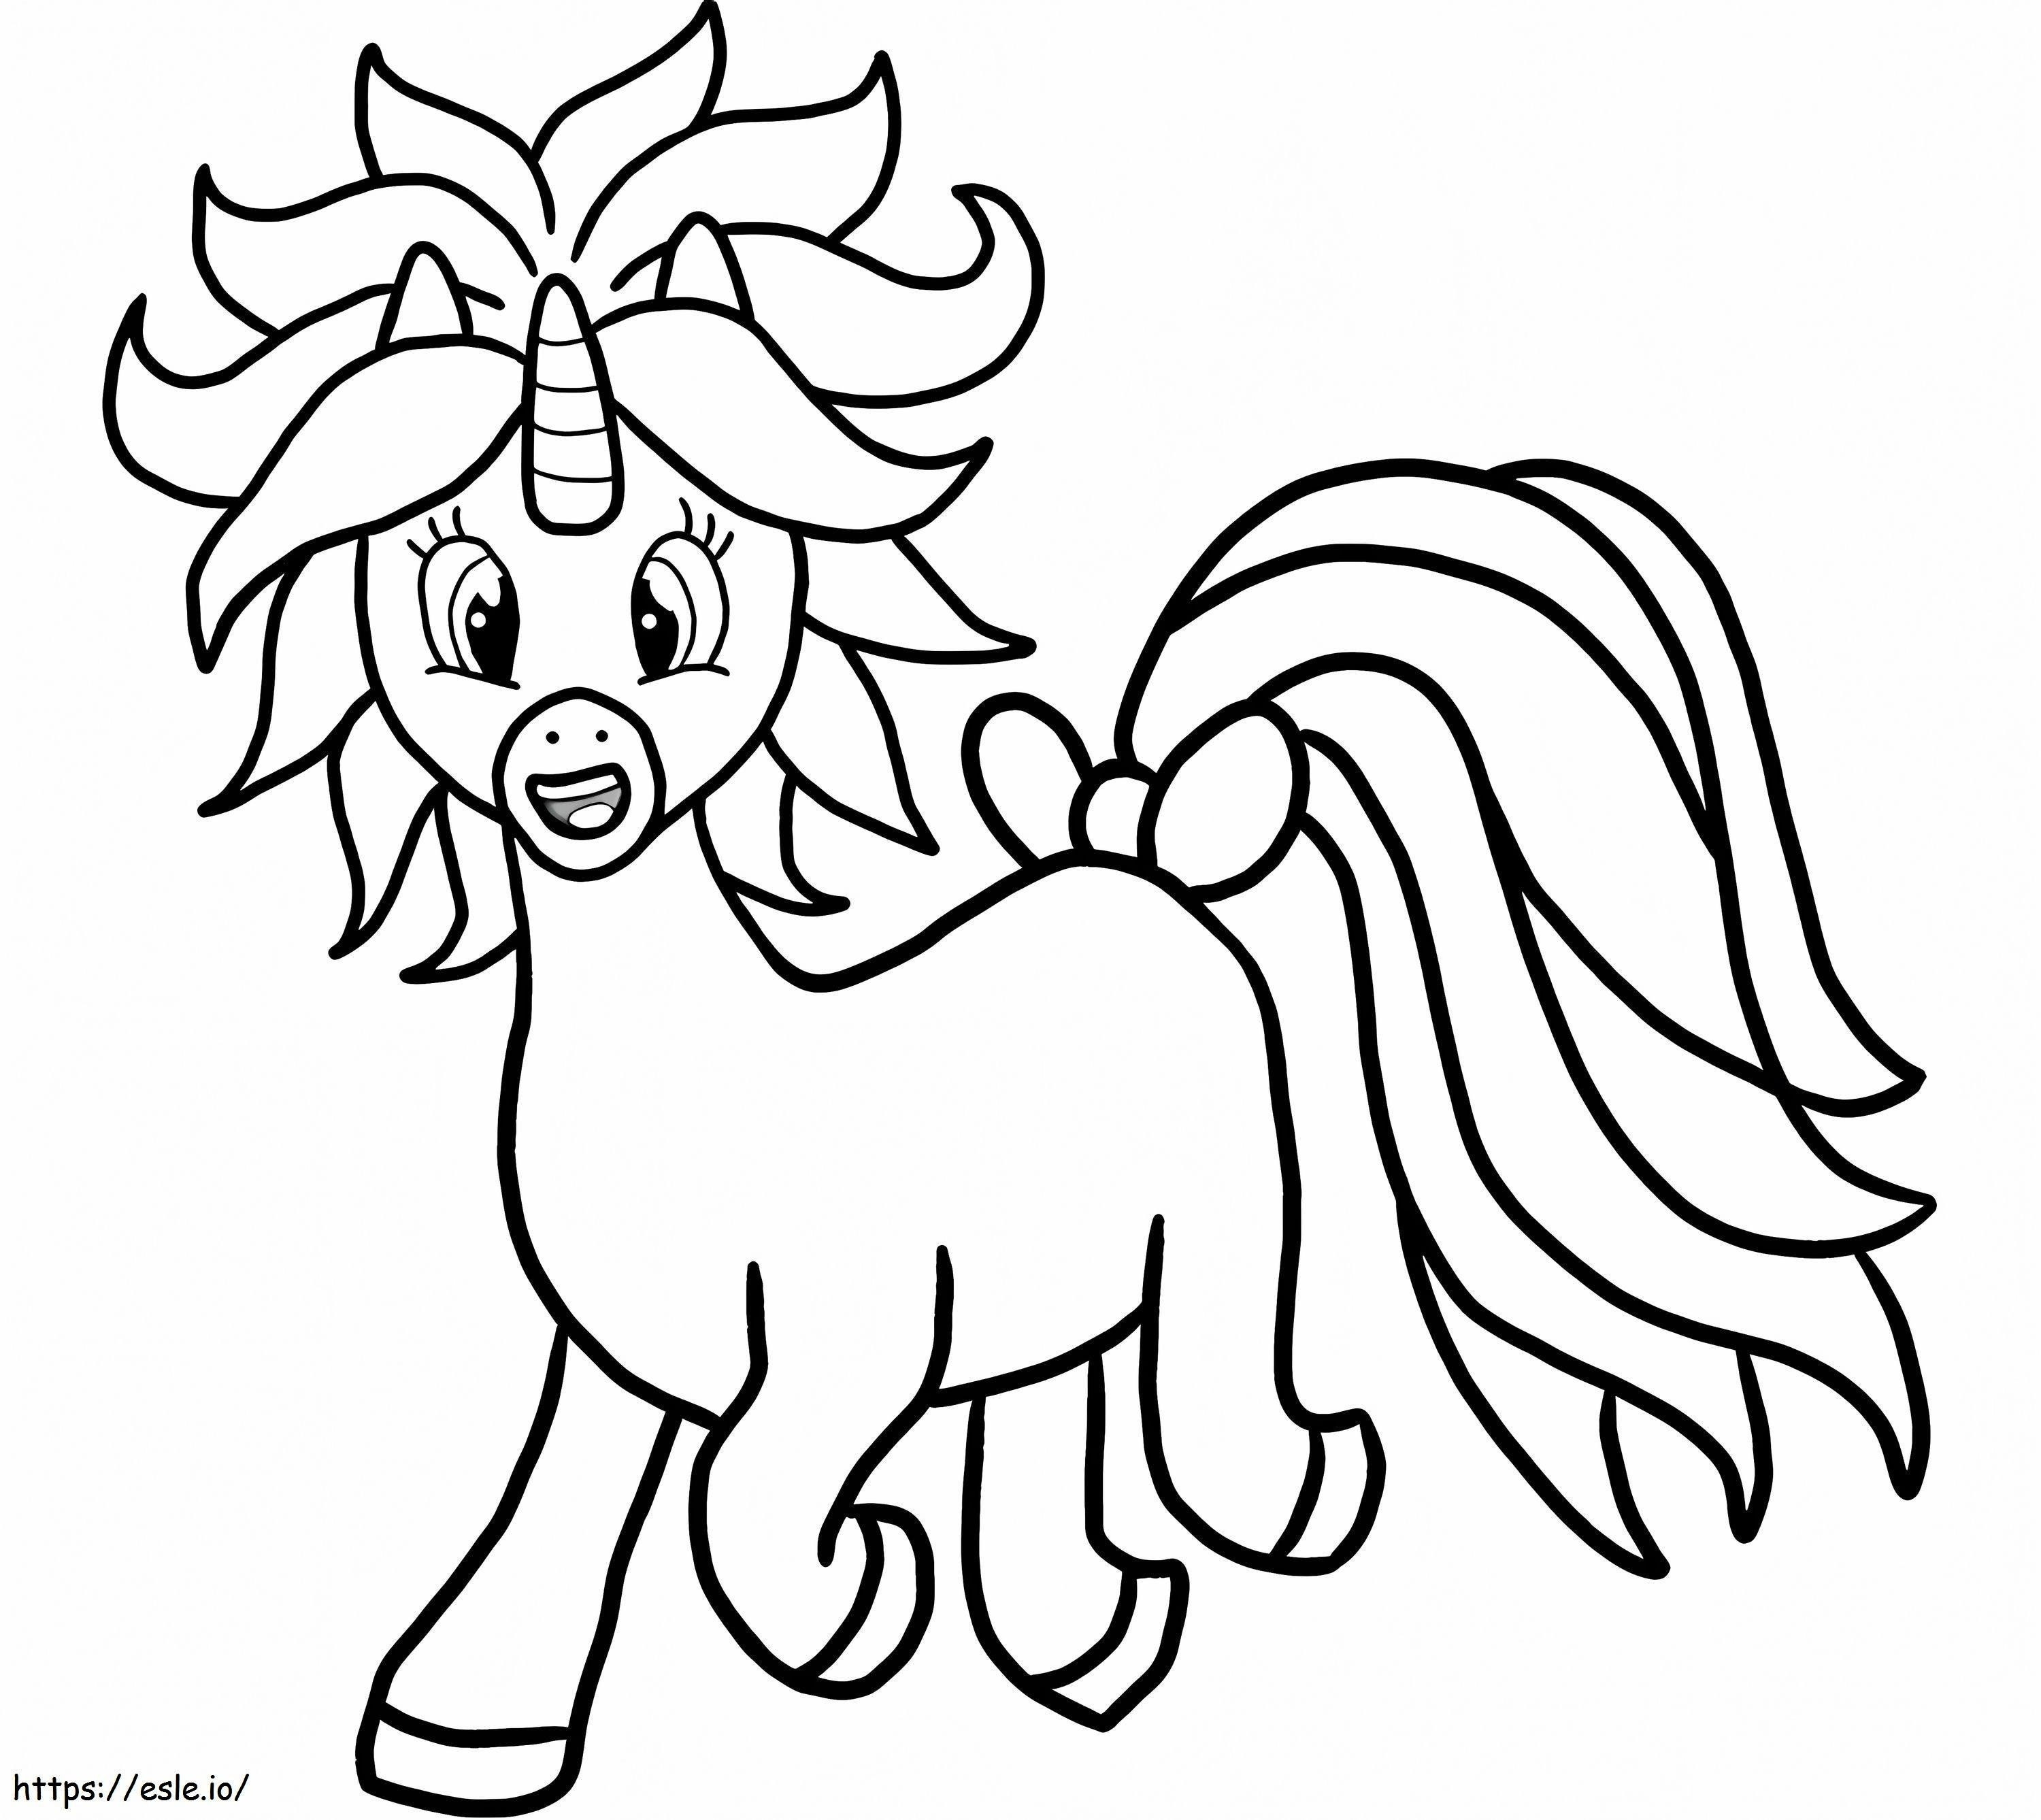 Hyperactive Unicorn 2 coloring page